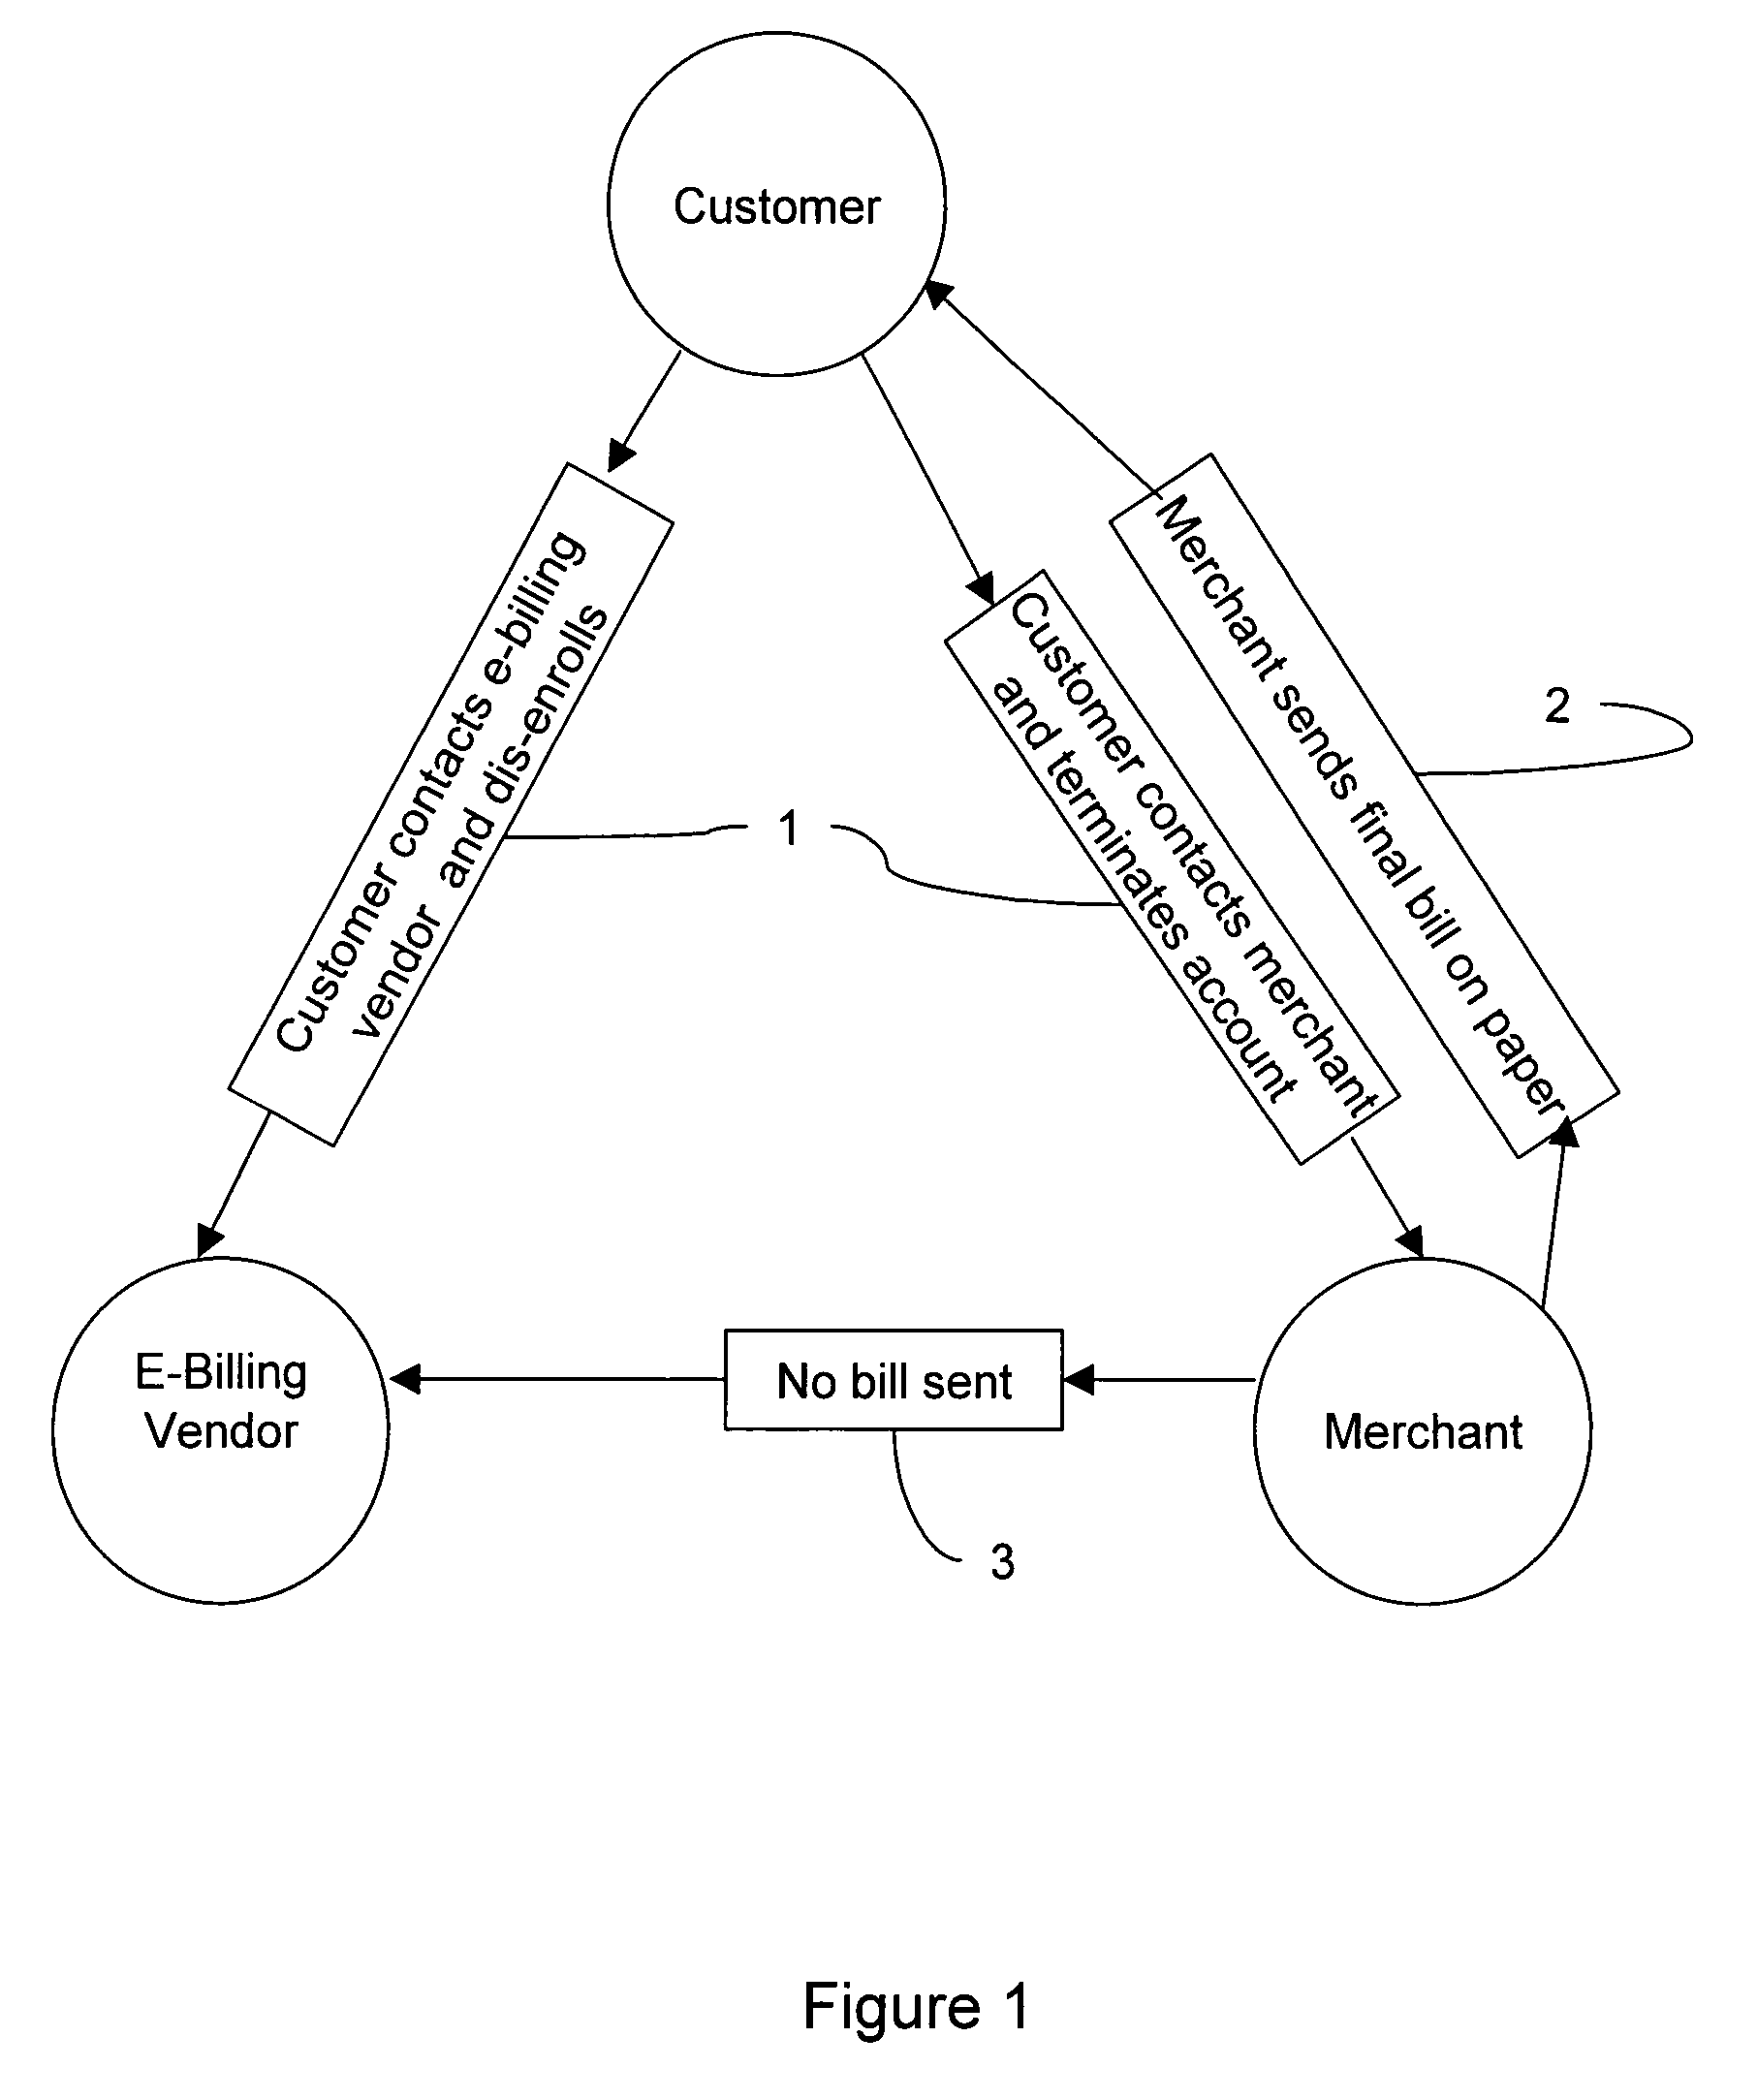 System and method for notifying an electronic billing vendor of a customer status change